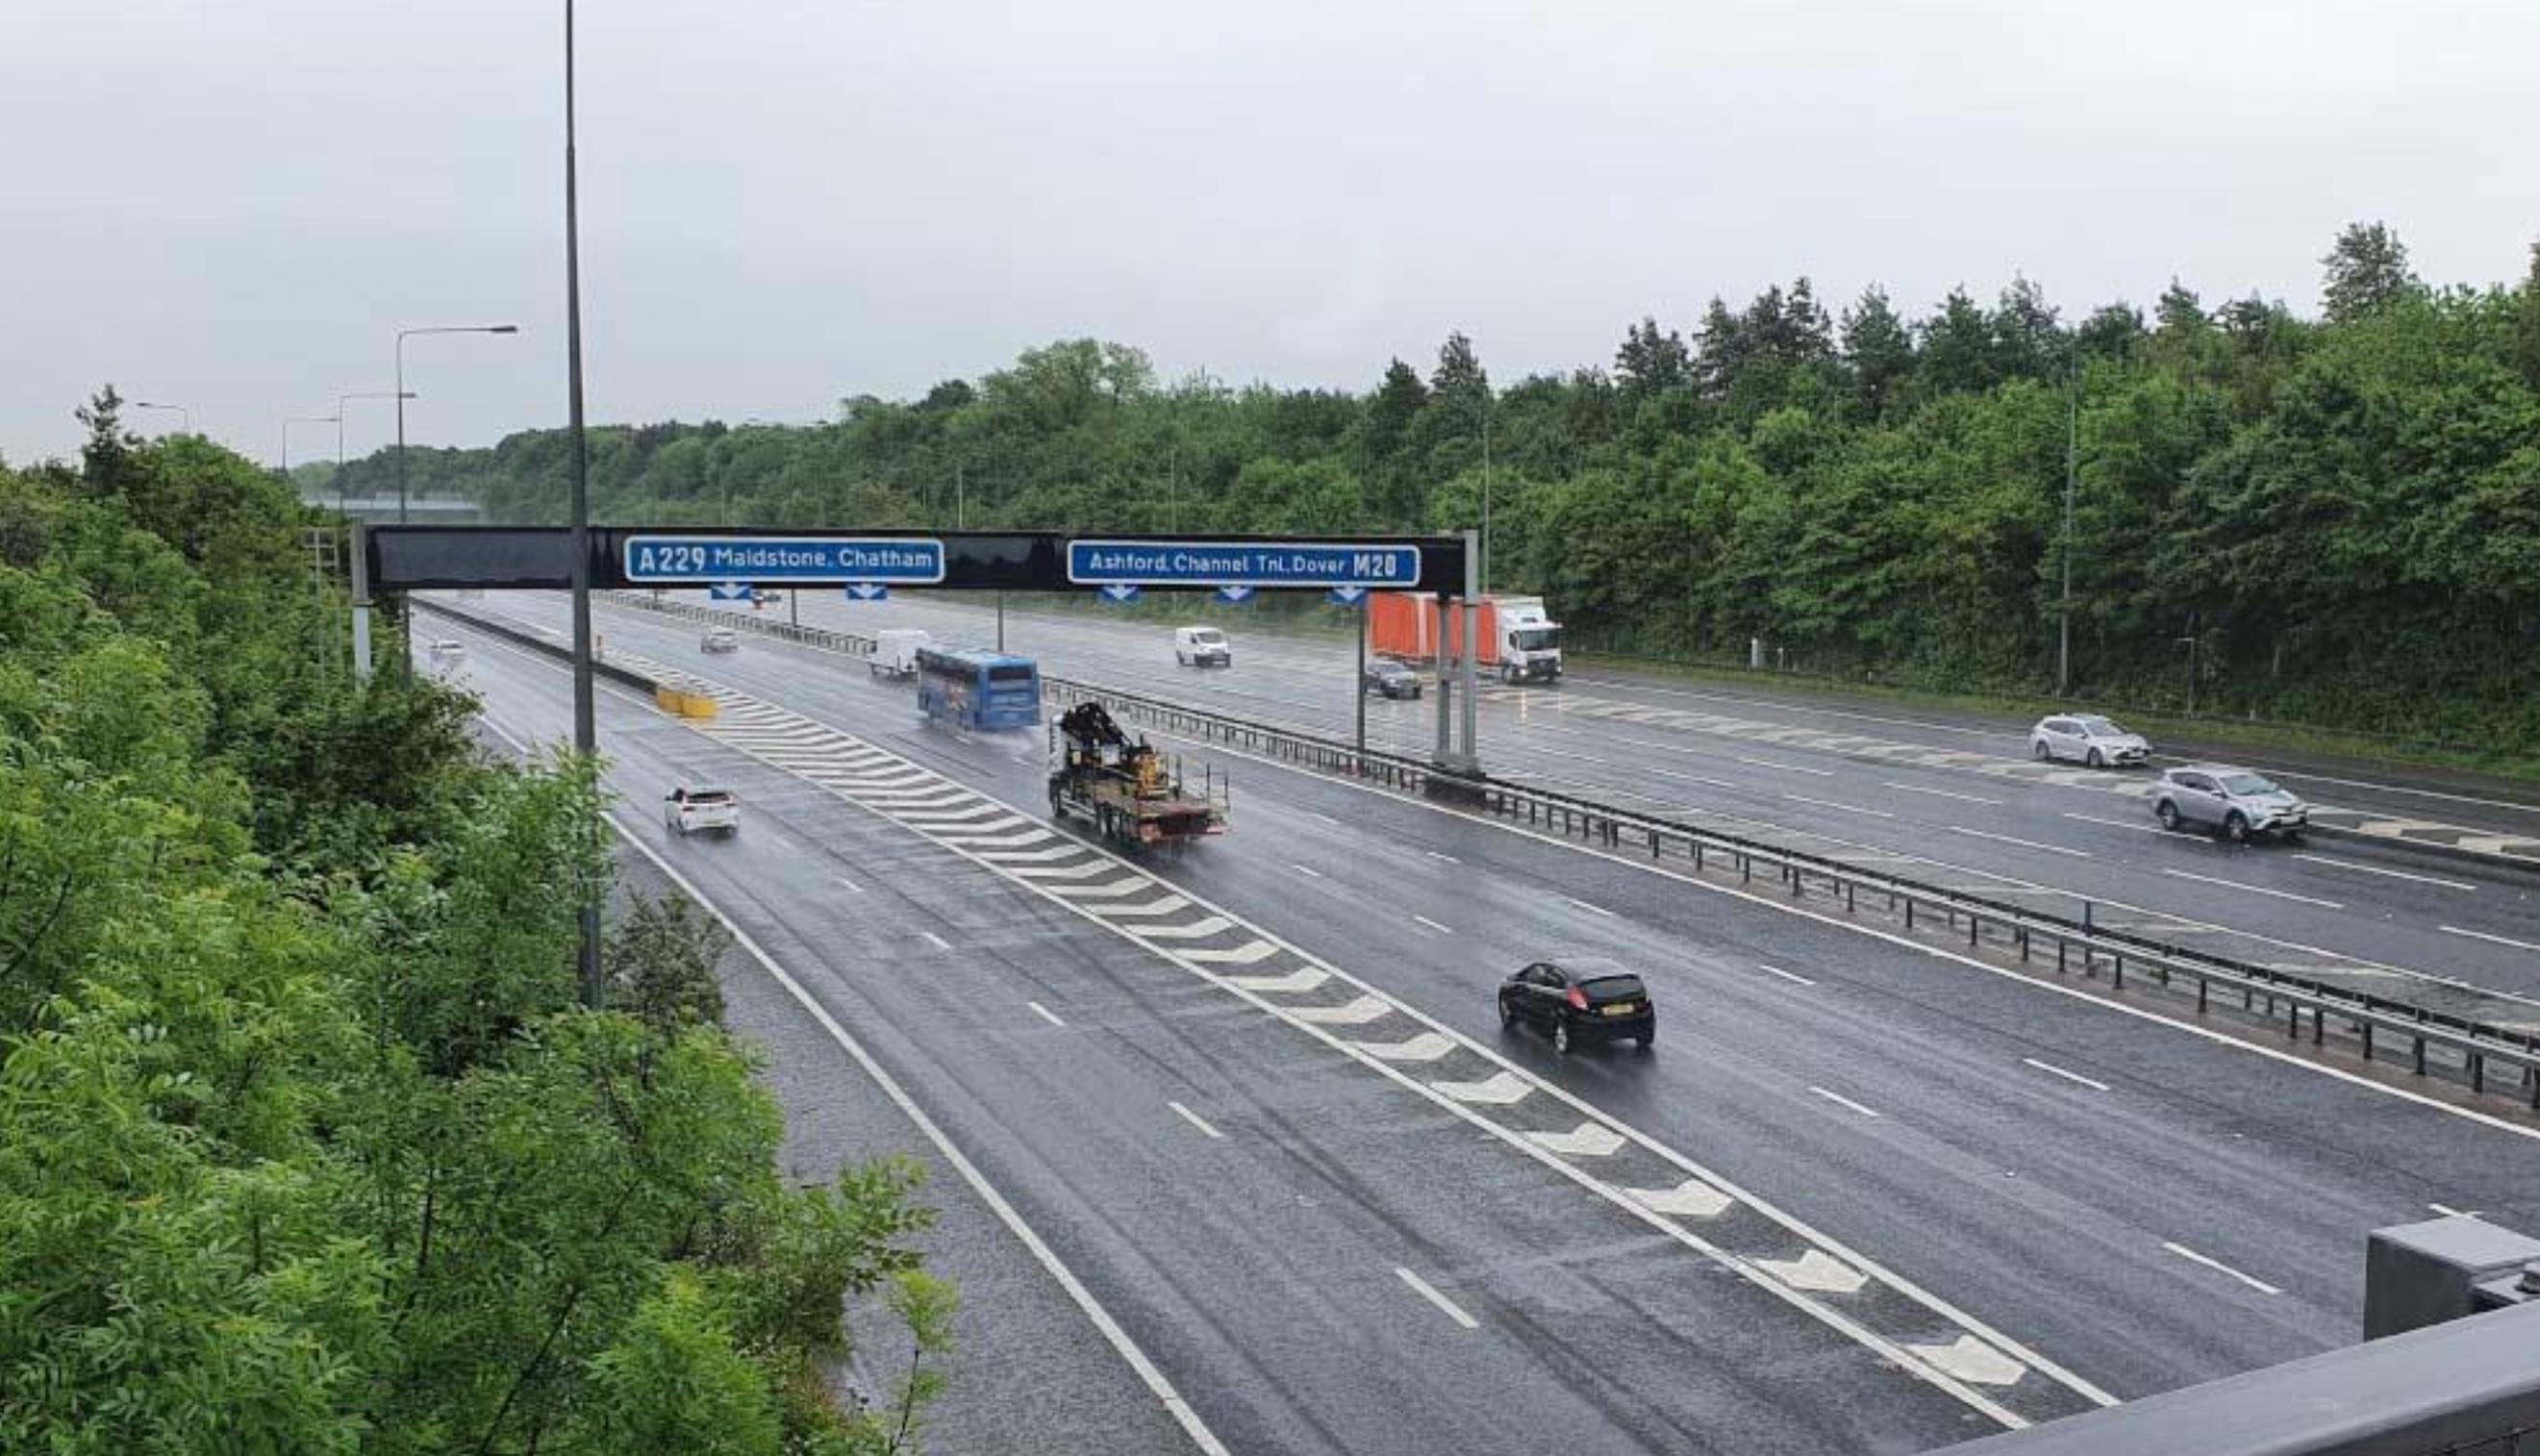 National Highways is a Government company that plans, designs, builds, operates and maintains England’s motorways and major A roads